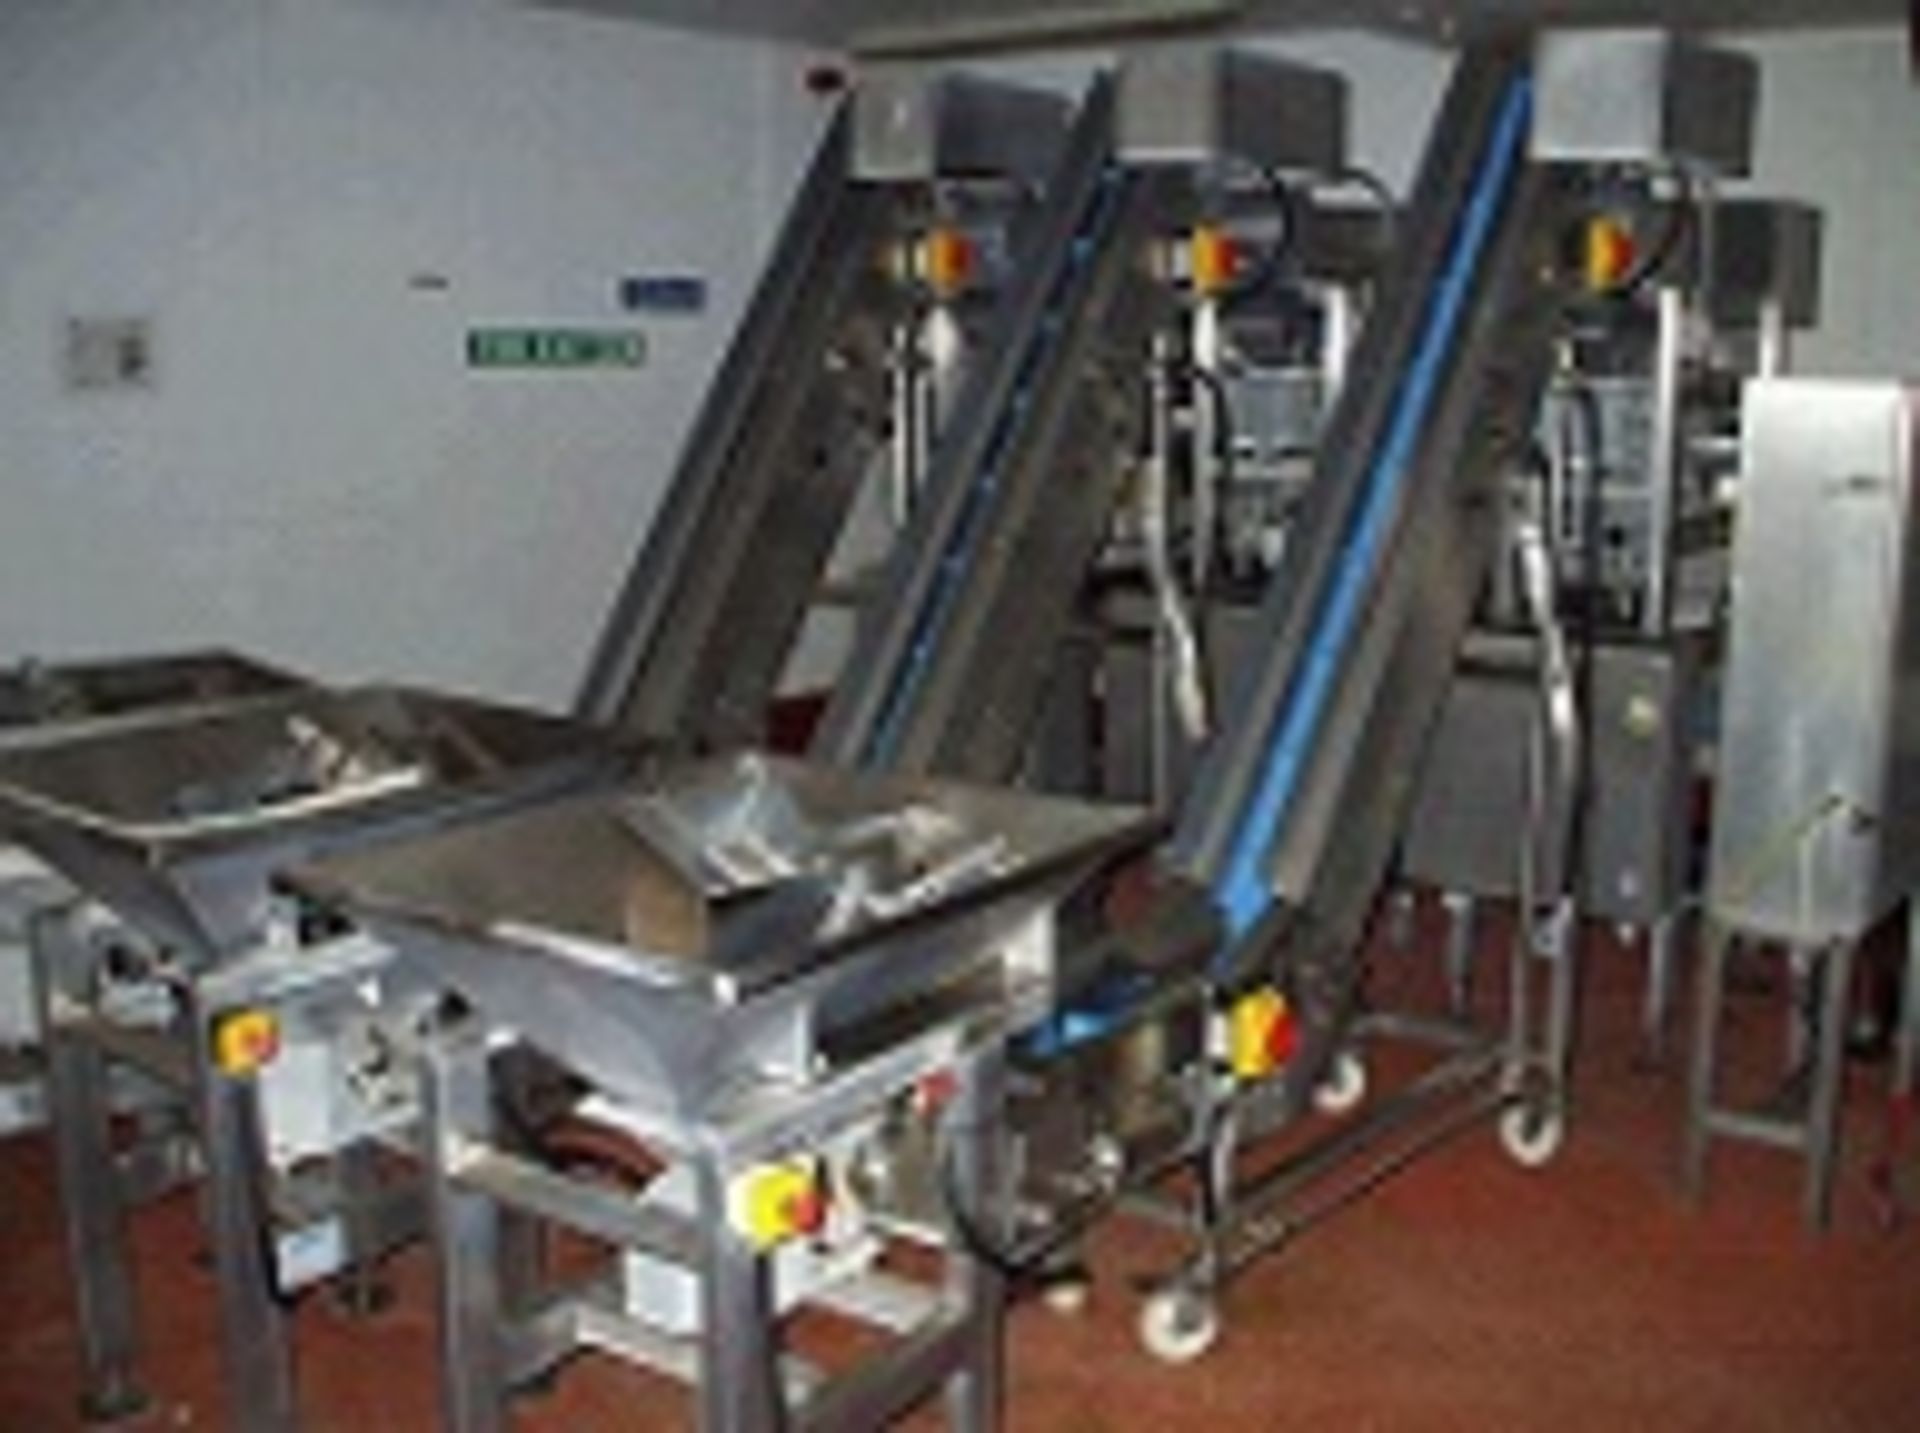 Liner Digitalis weighing system / weighing cell range  up to 10,000 grams,